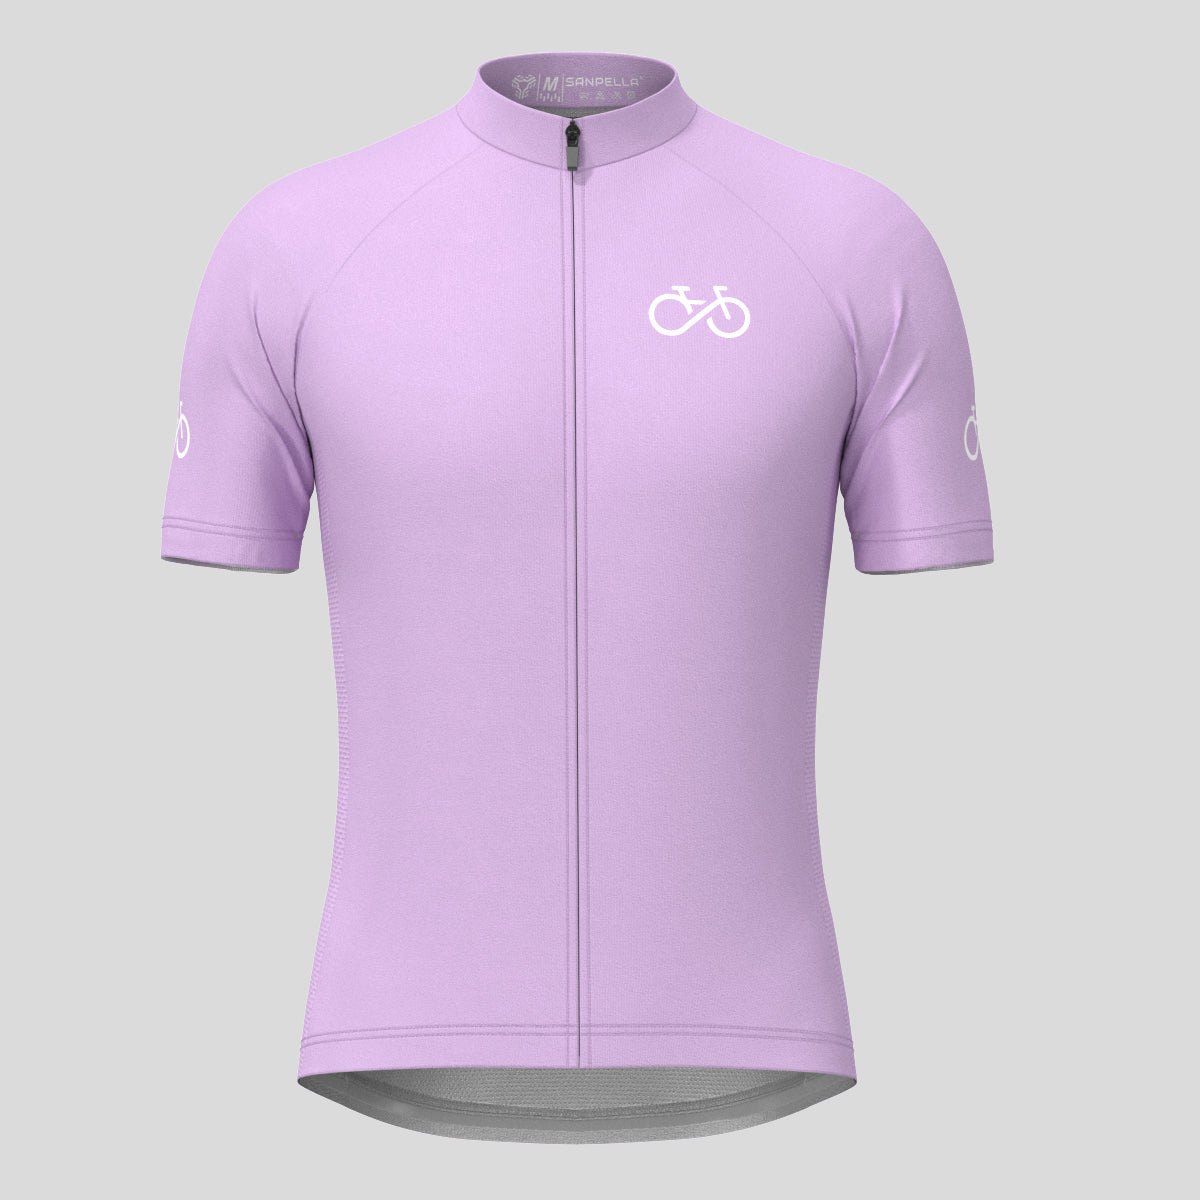 Ride Forever Men's Cycling Jersey -Haze